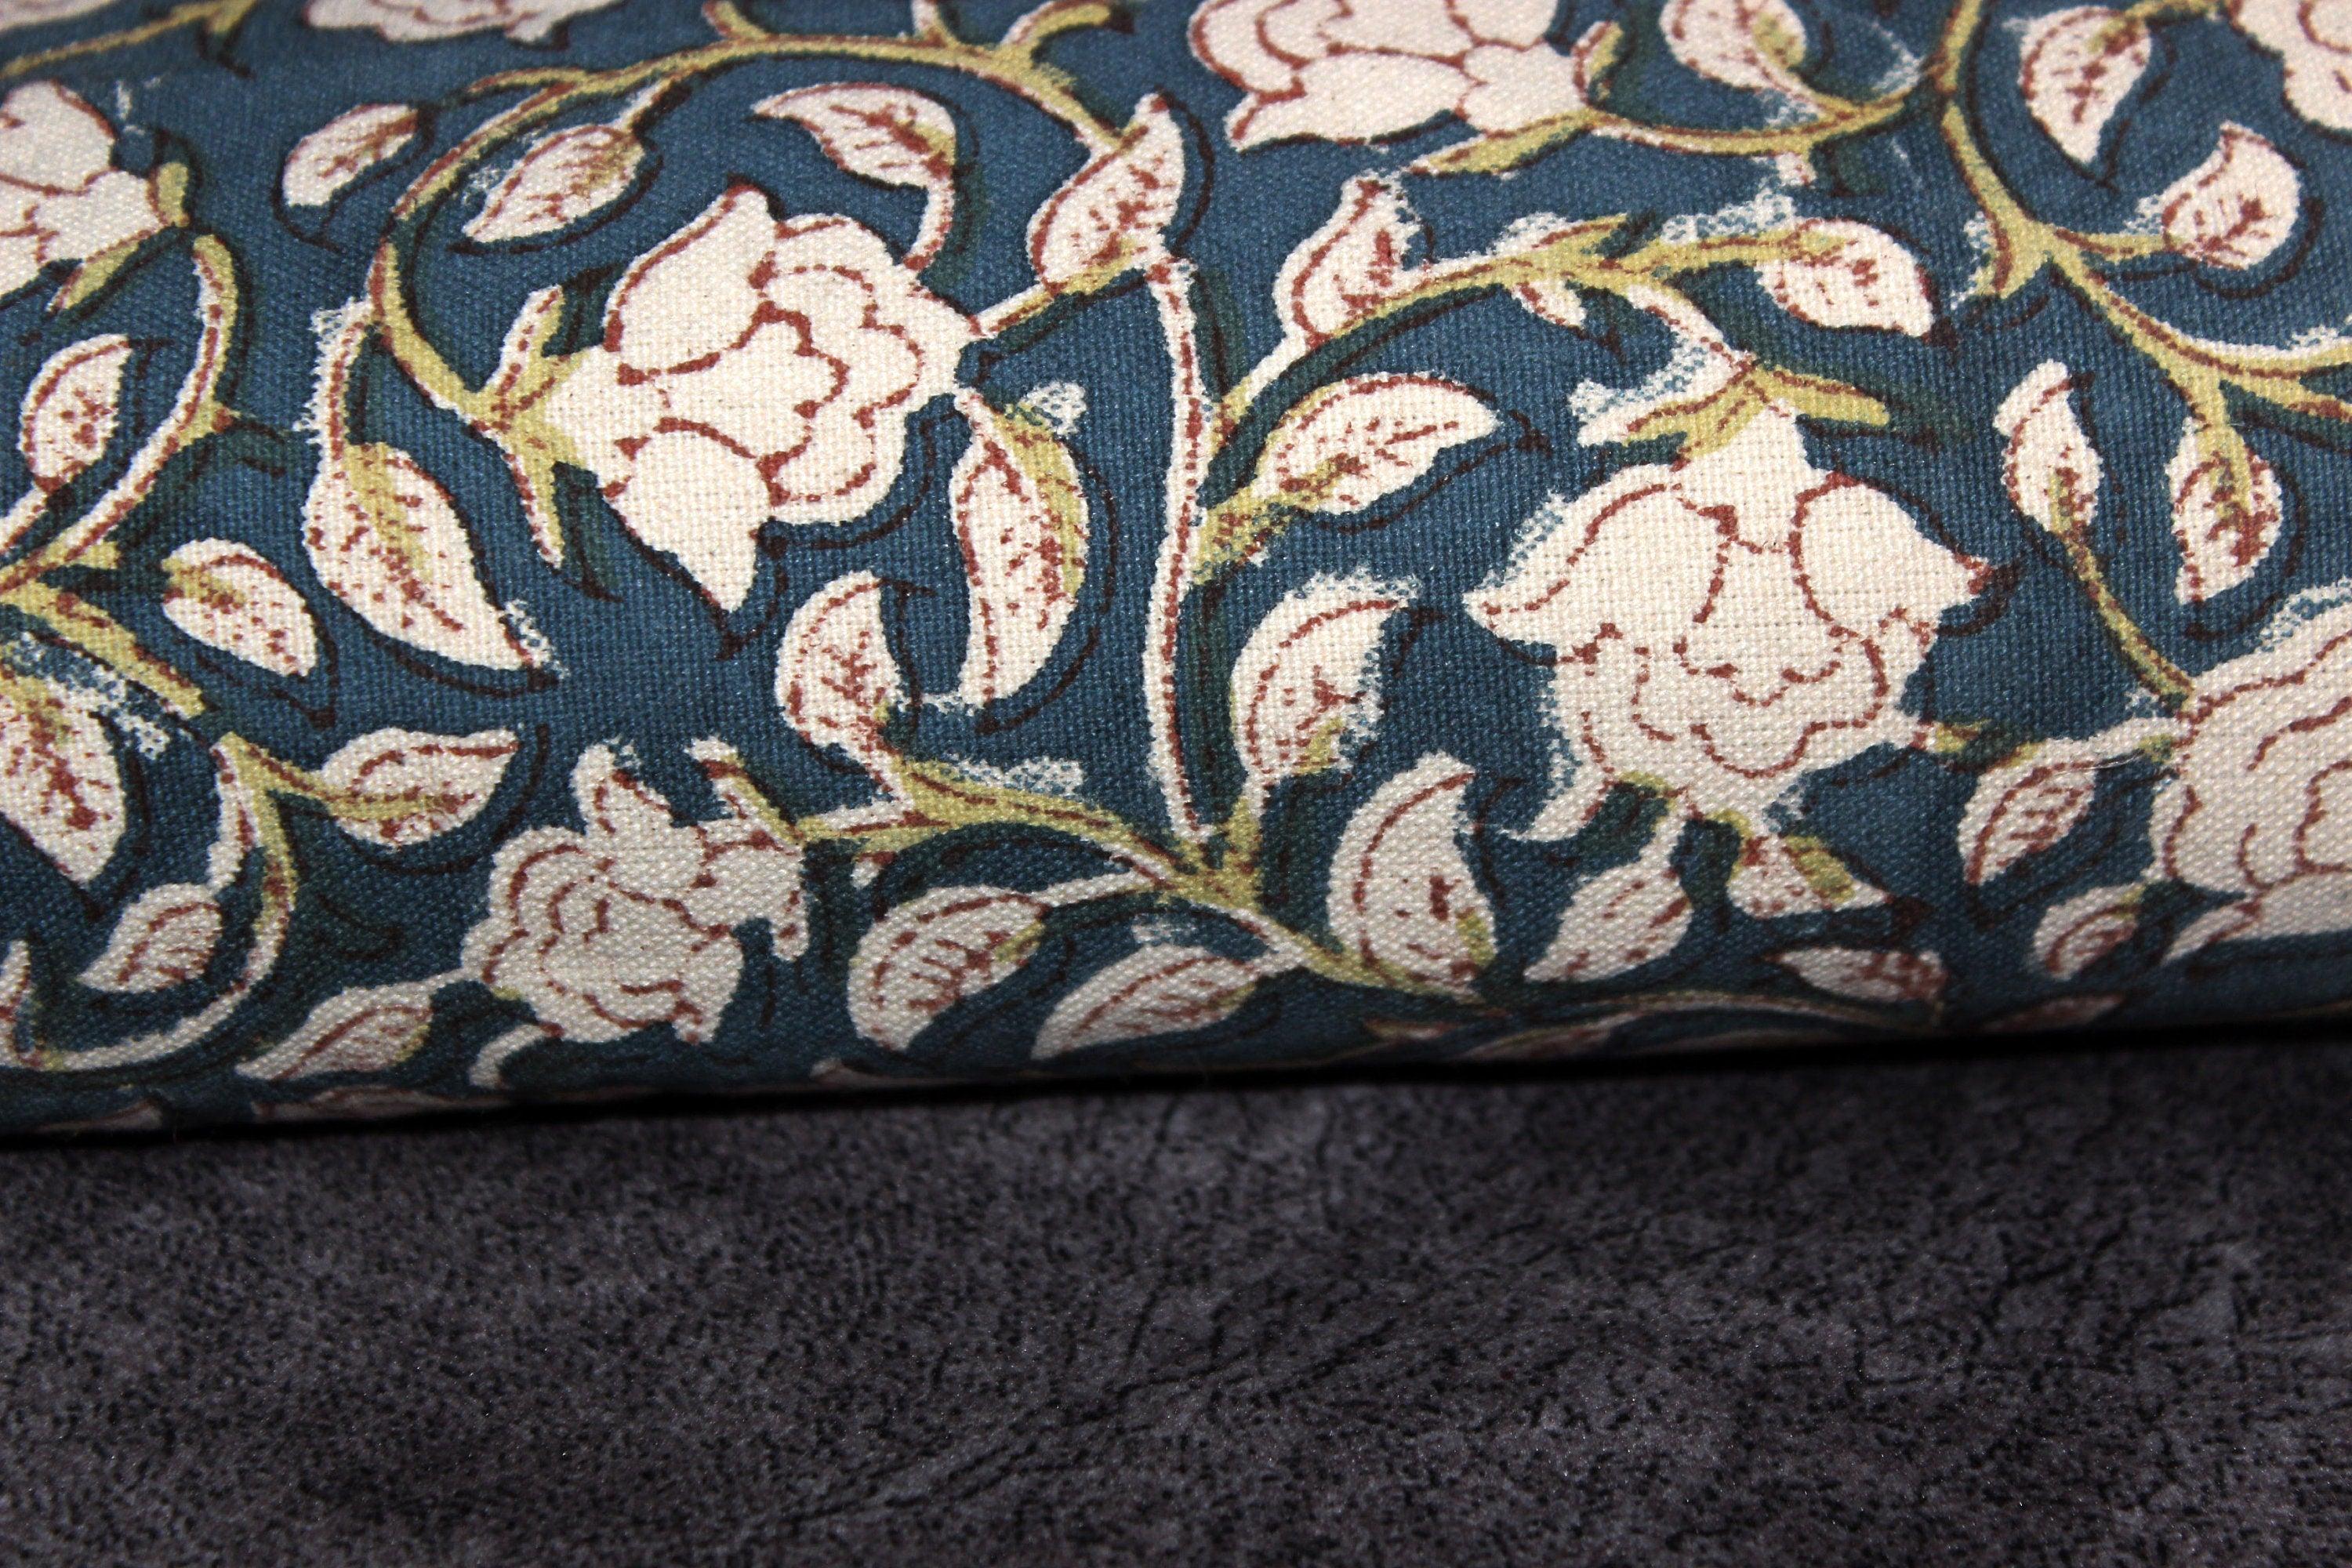 Amrit Vela  Floral Linen Hand Block Fabric  Indian Fabrics Printed Linen & Cotton By The Yard  Natural And Organic Fabrics